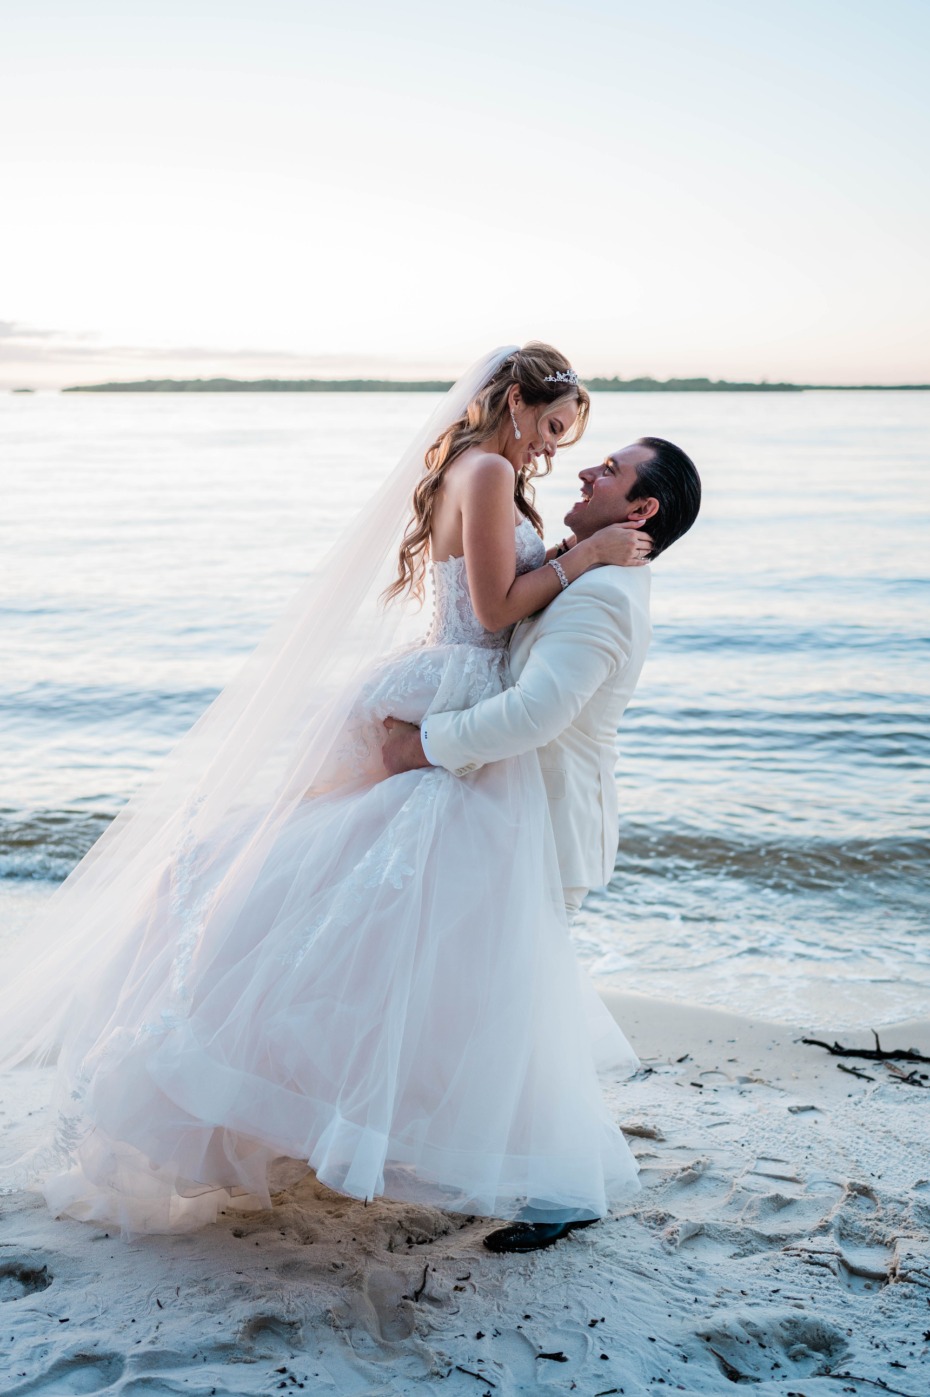 Thereâs No Better Place Than the Beach To Get Married Outdoors